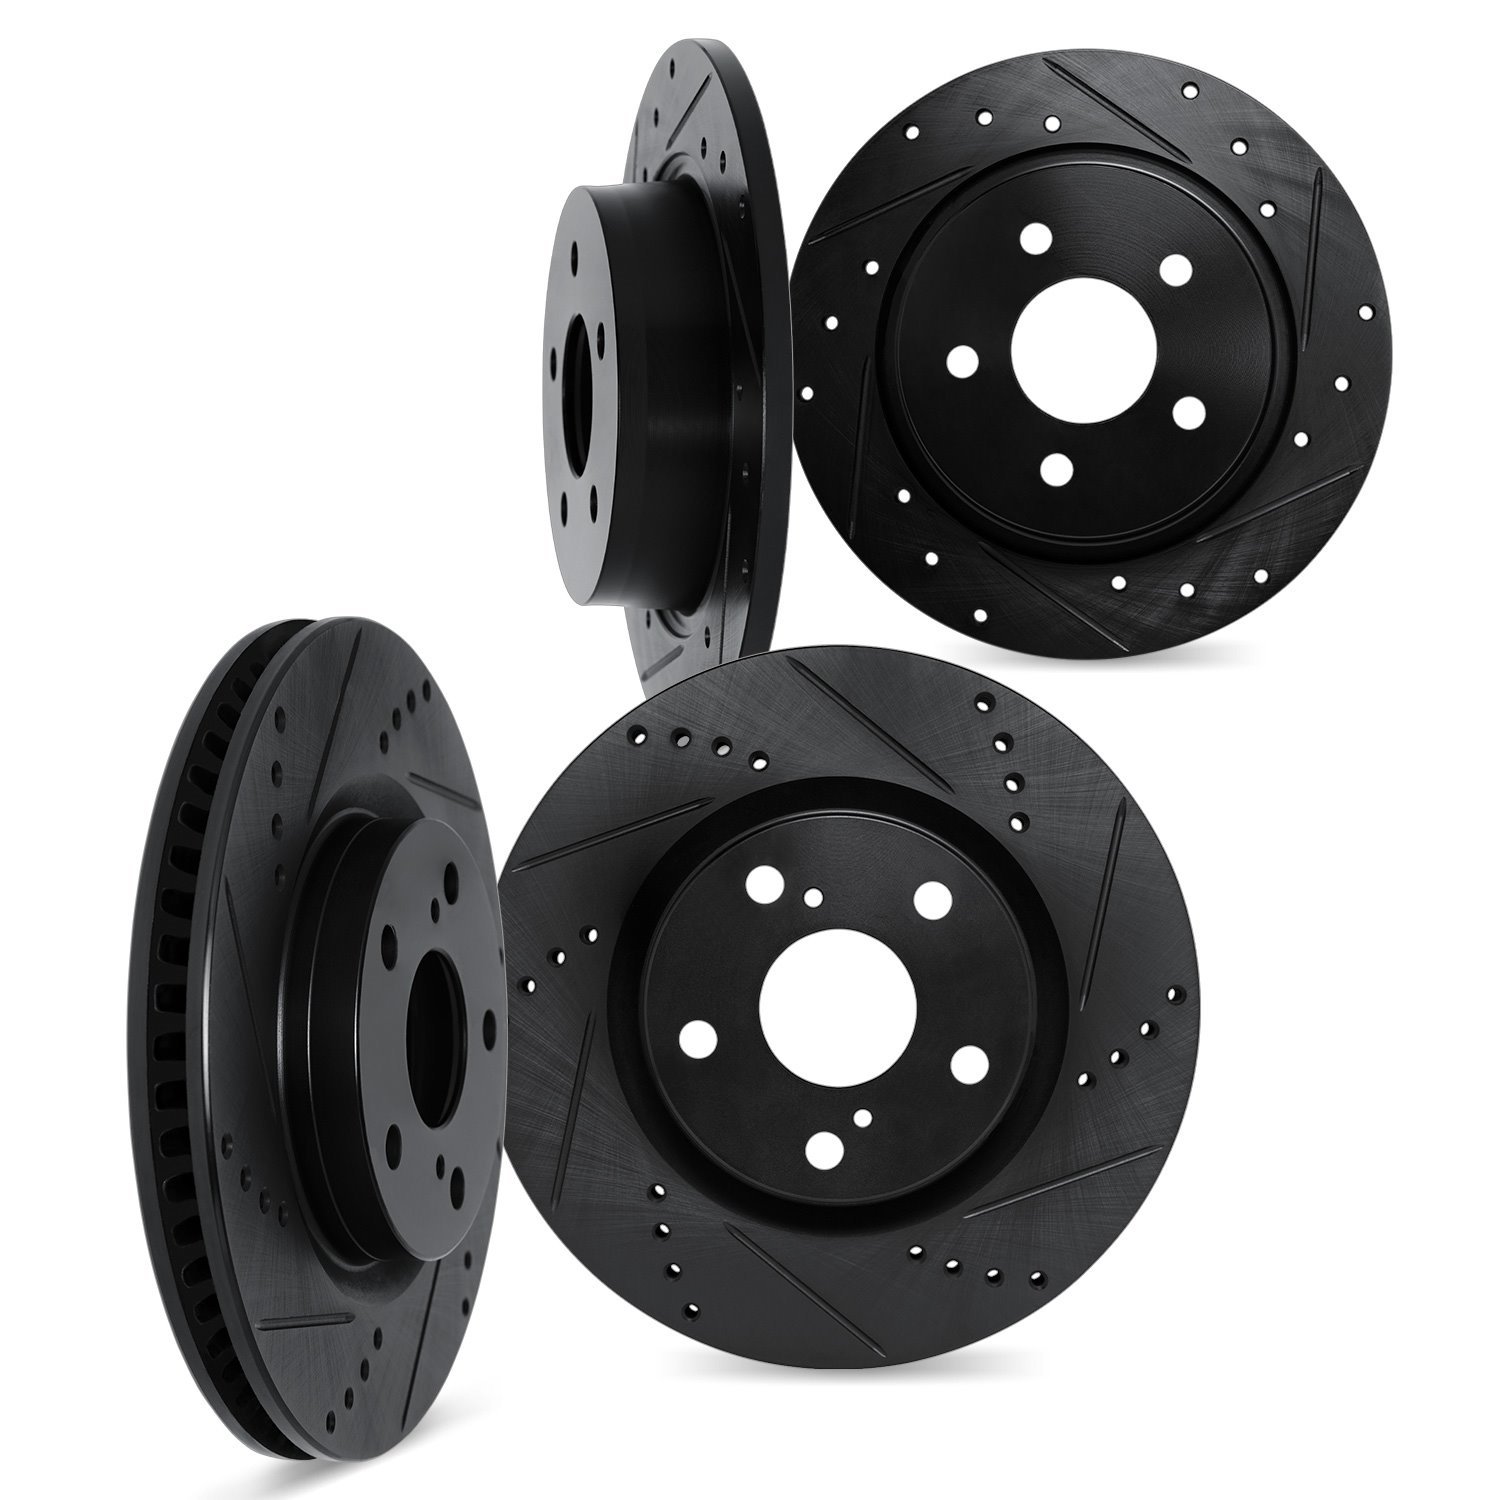 8004-31101 Drilled/Slotted Brake Rotors [Black], 2001-2002 BMW, Position: Front and Rear